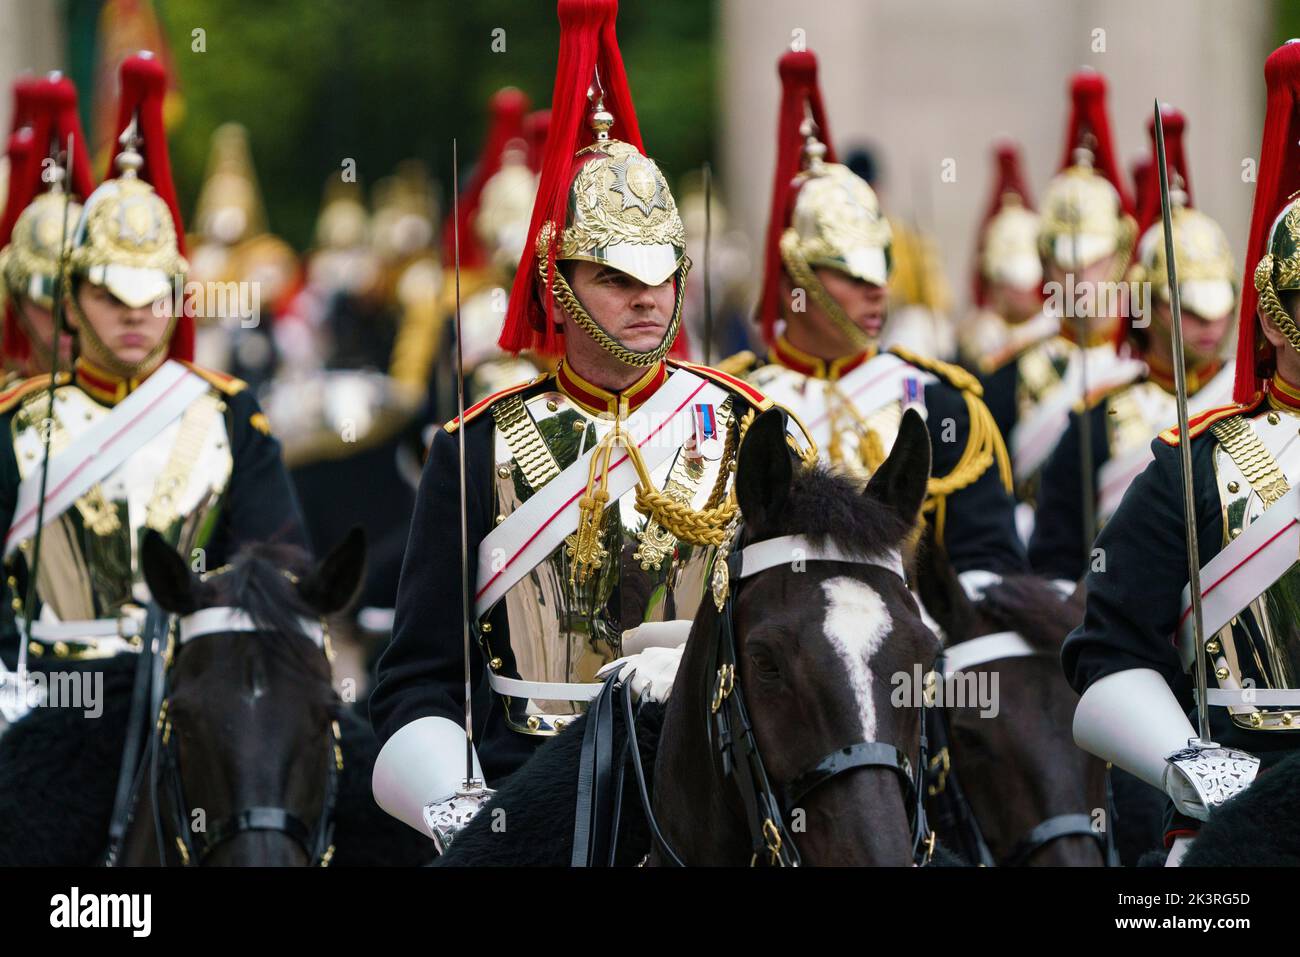 LONDON - SEPTEMBER 19: The Household Cavalry is made up of the two most senior regiments of the British Army, the Life Guards and the Blues and Royals. The Household Cavalry is part of the Household Division and is the King's official bodyguard. At the State Funeral of Queen Elizabeth II on September 19, 2022.  Photo: David Levenson/Alamy Stock Photo